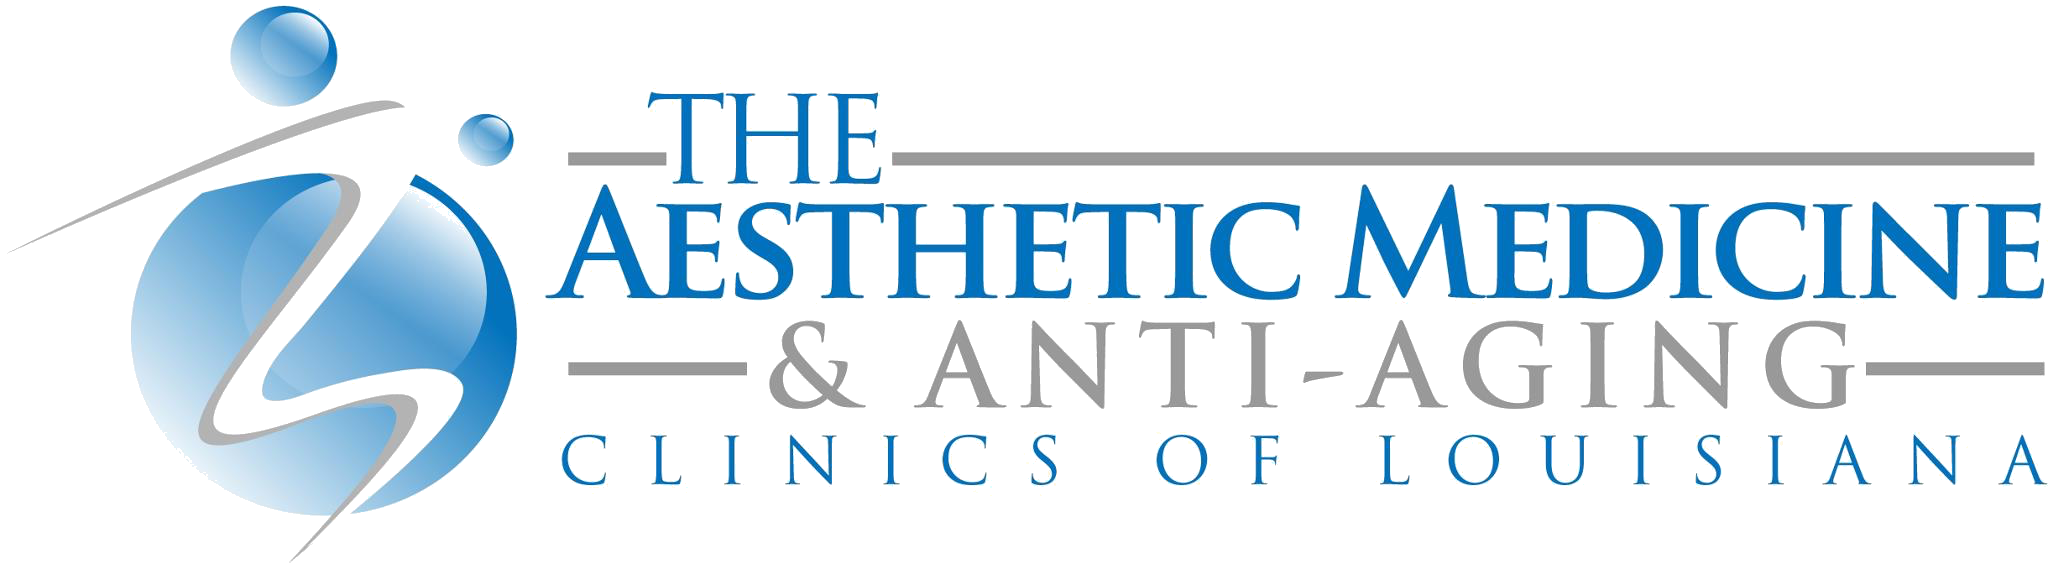 The Aesthetic Medicine & Anti-Aging Clinic 